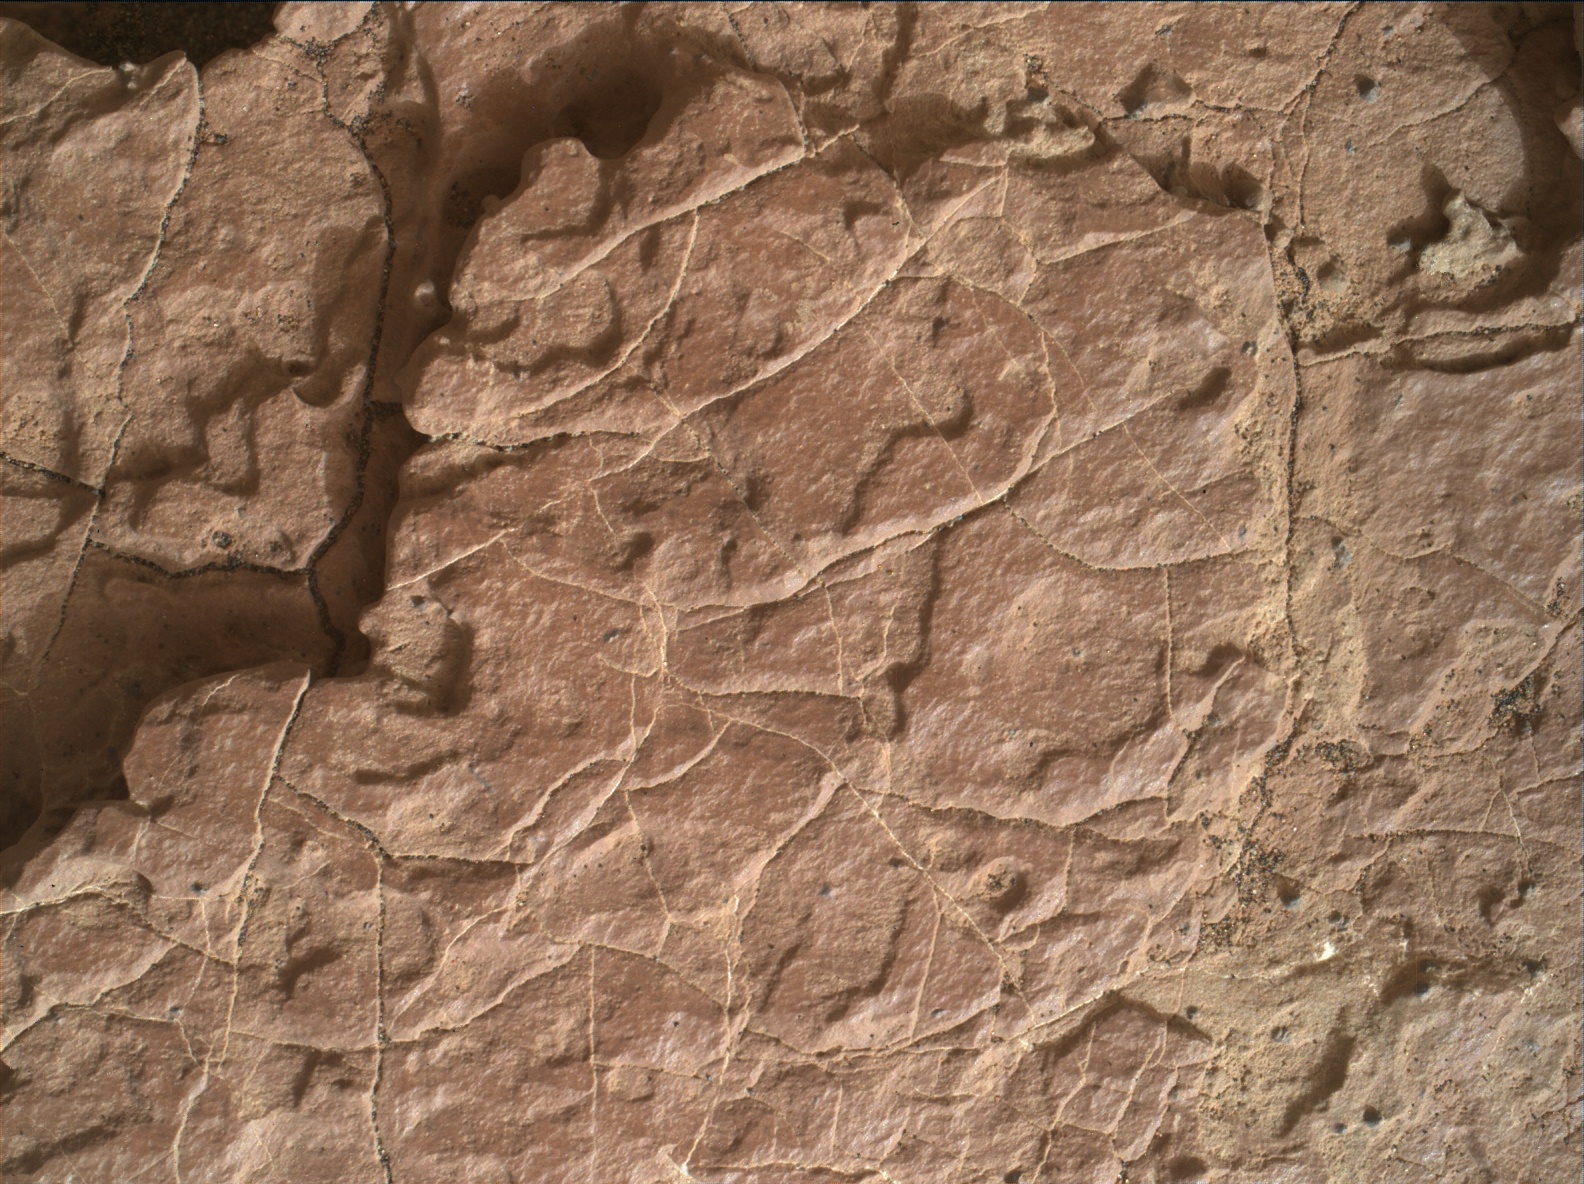 Nasa's Mars rover Curiosity acquired this image using its Mars Hand Lens Imager (MAHLI) on Sol 1635